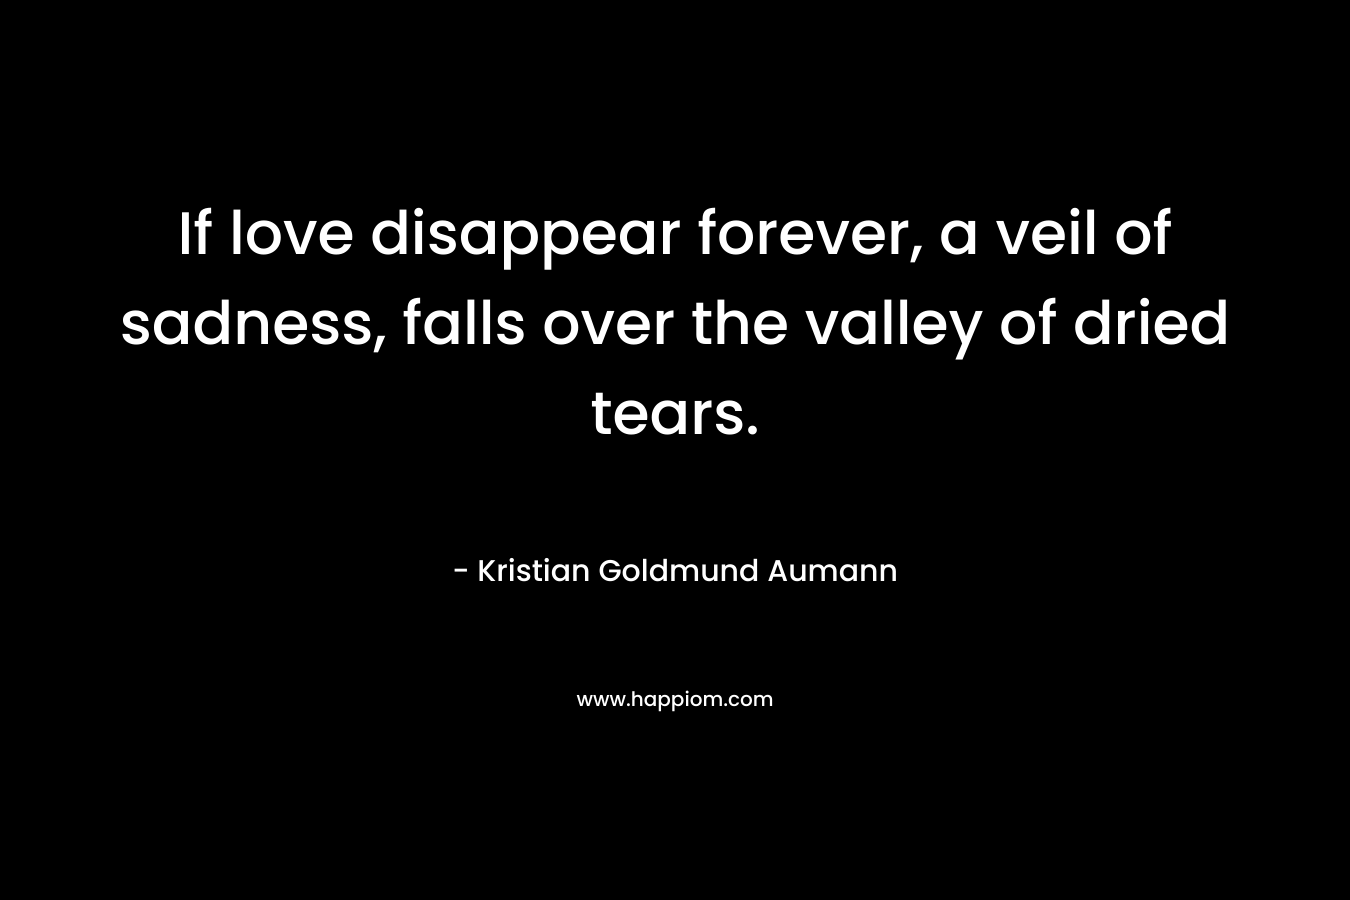 If love disappear forever, a veil of sadness, falls over the valley of dried tears. – Kristian Goldmund Aumann